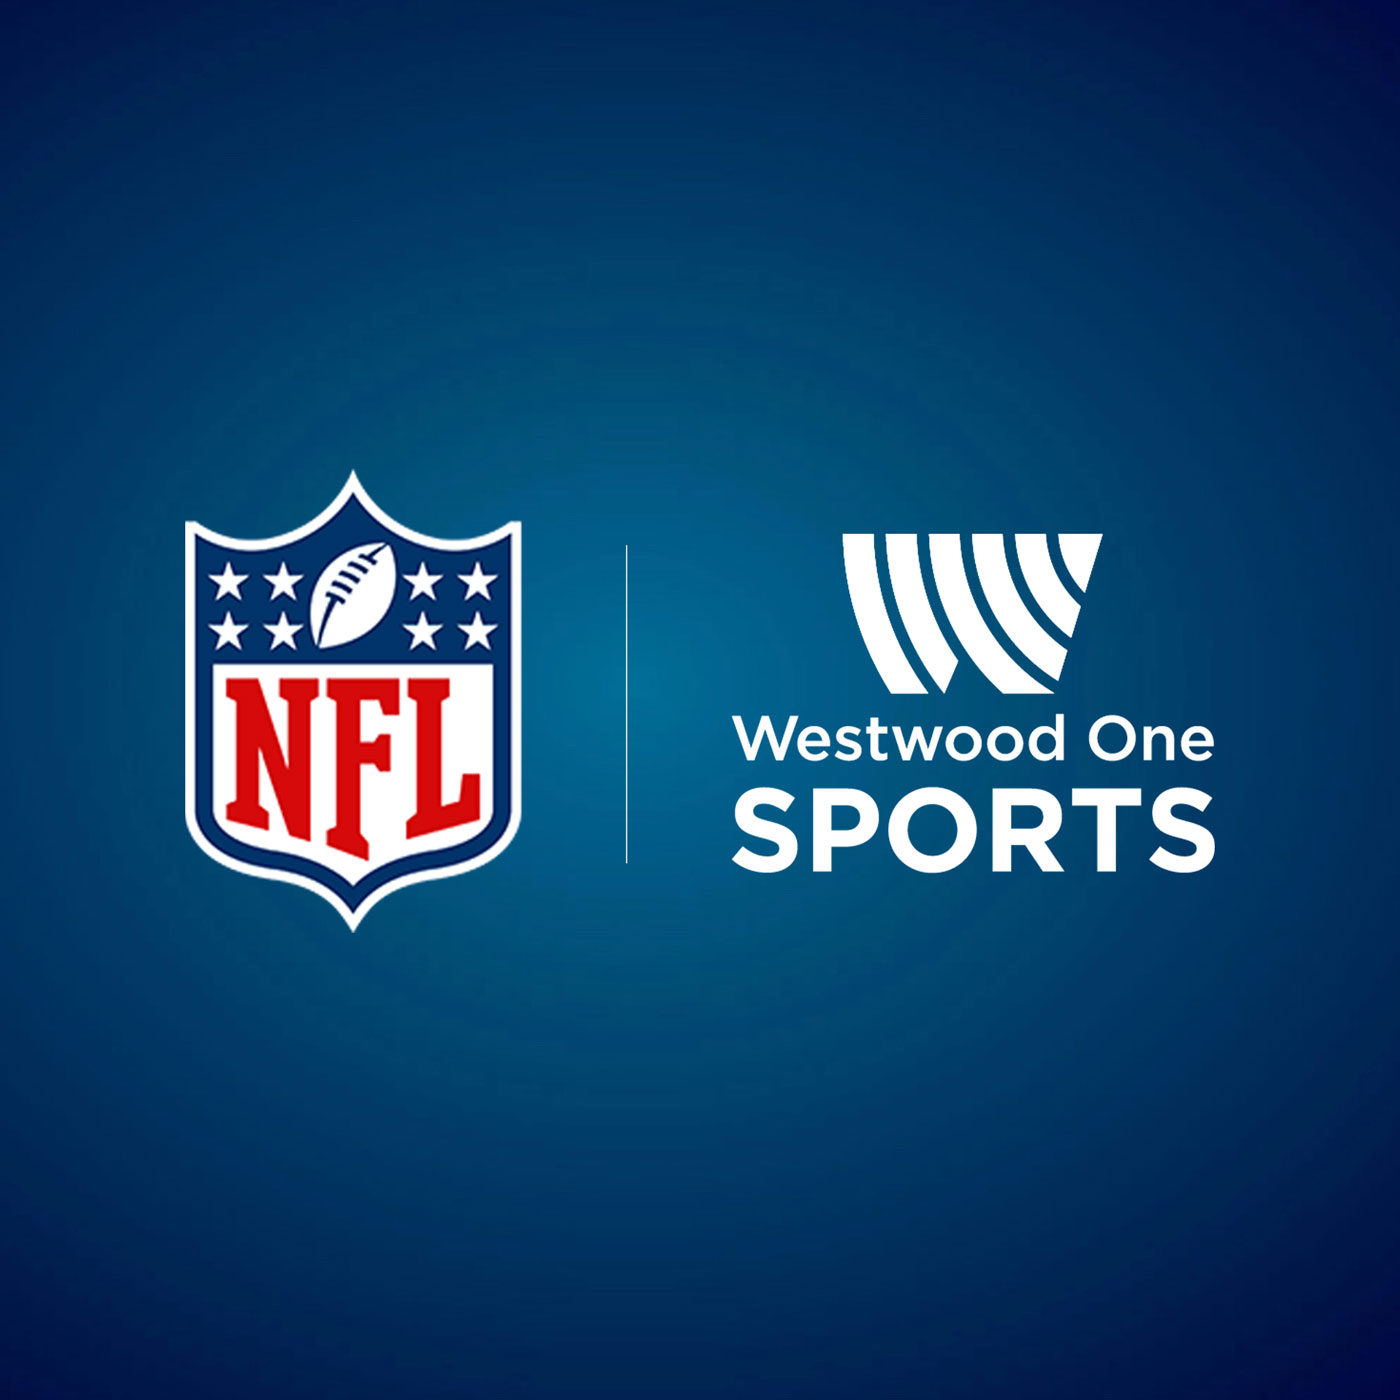 The NFL on Westwood One